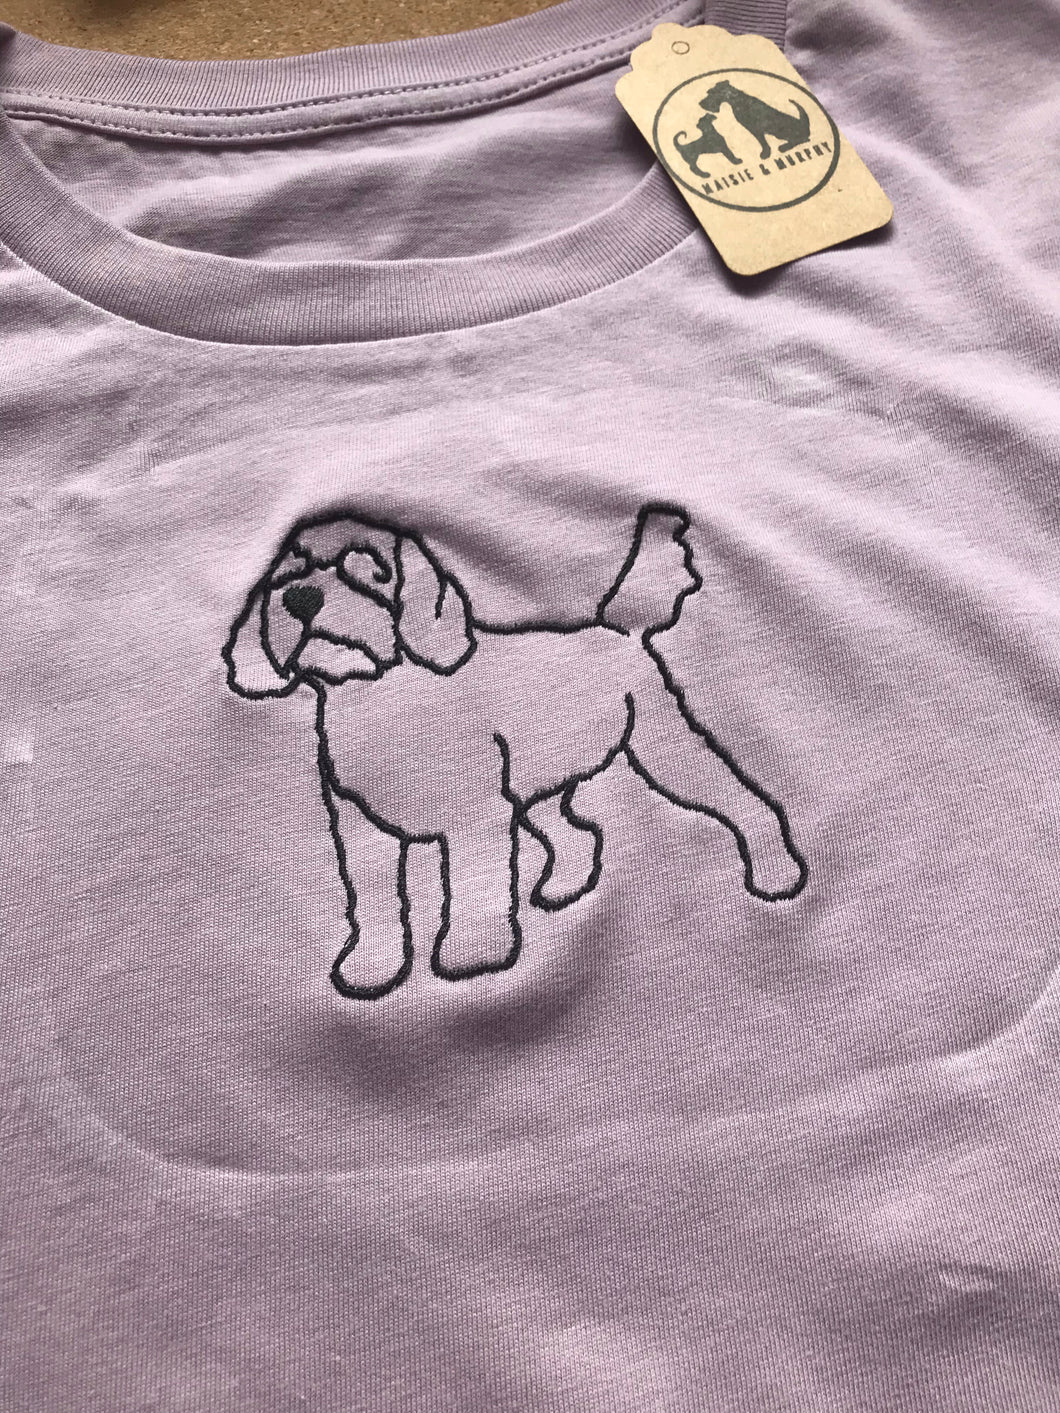 Embroidered Cockapoo Silhouette Sweatshirt- Gifts for cockapoo / cavapoo lovers and owners